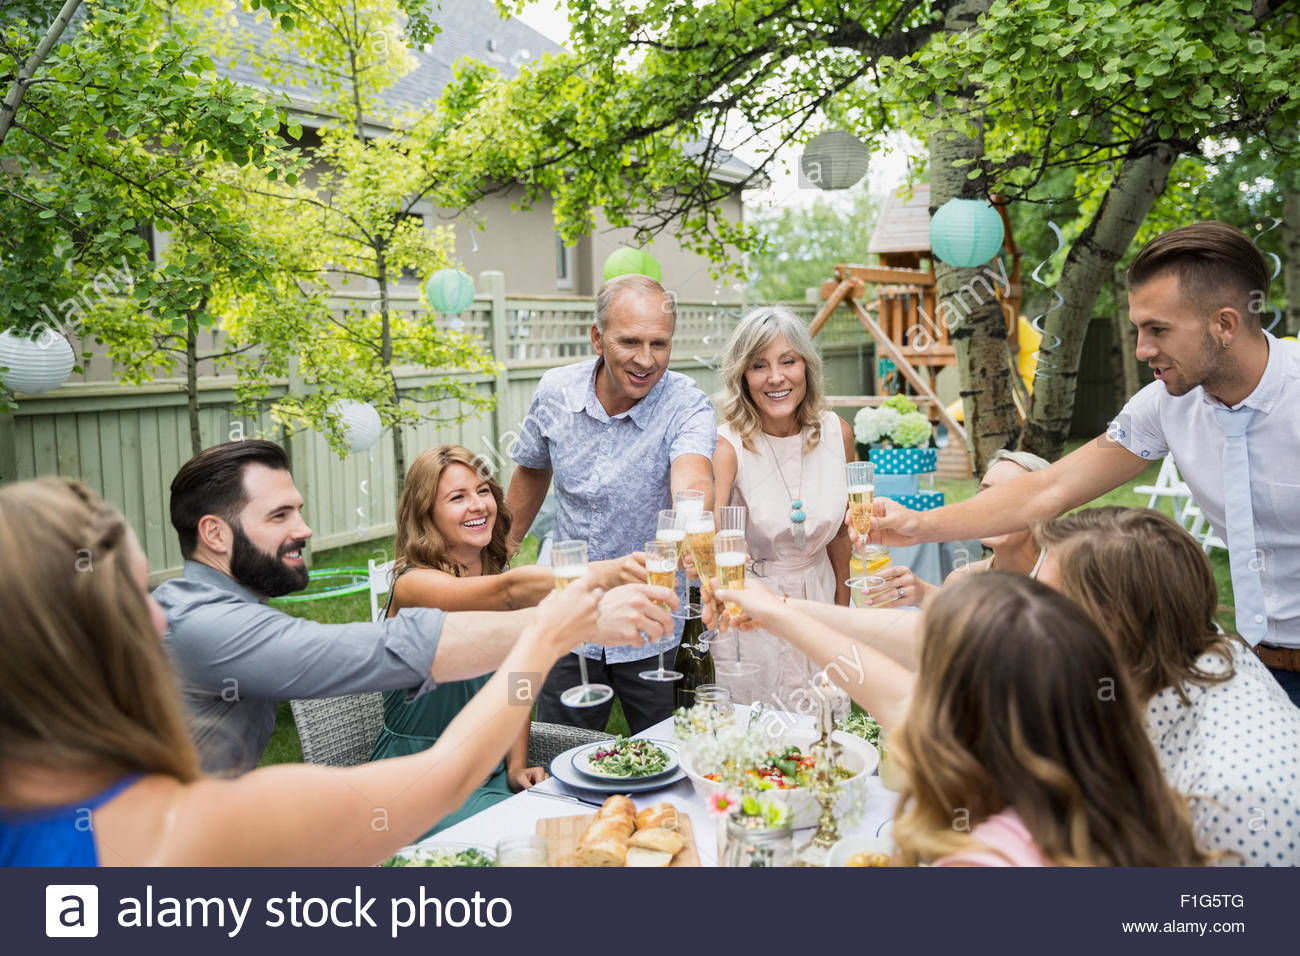 Family toasting champagne flutes at garden party Stock Photo